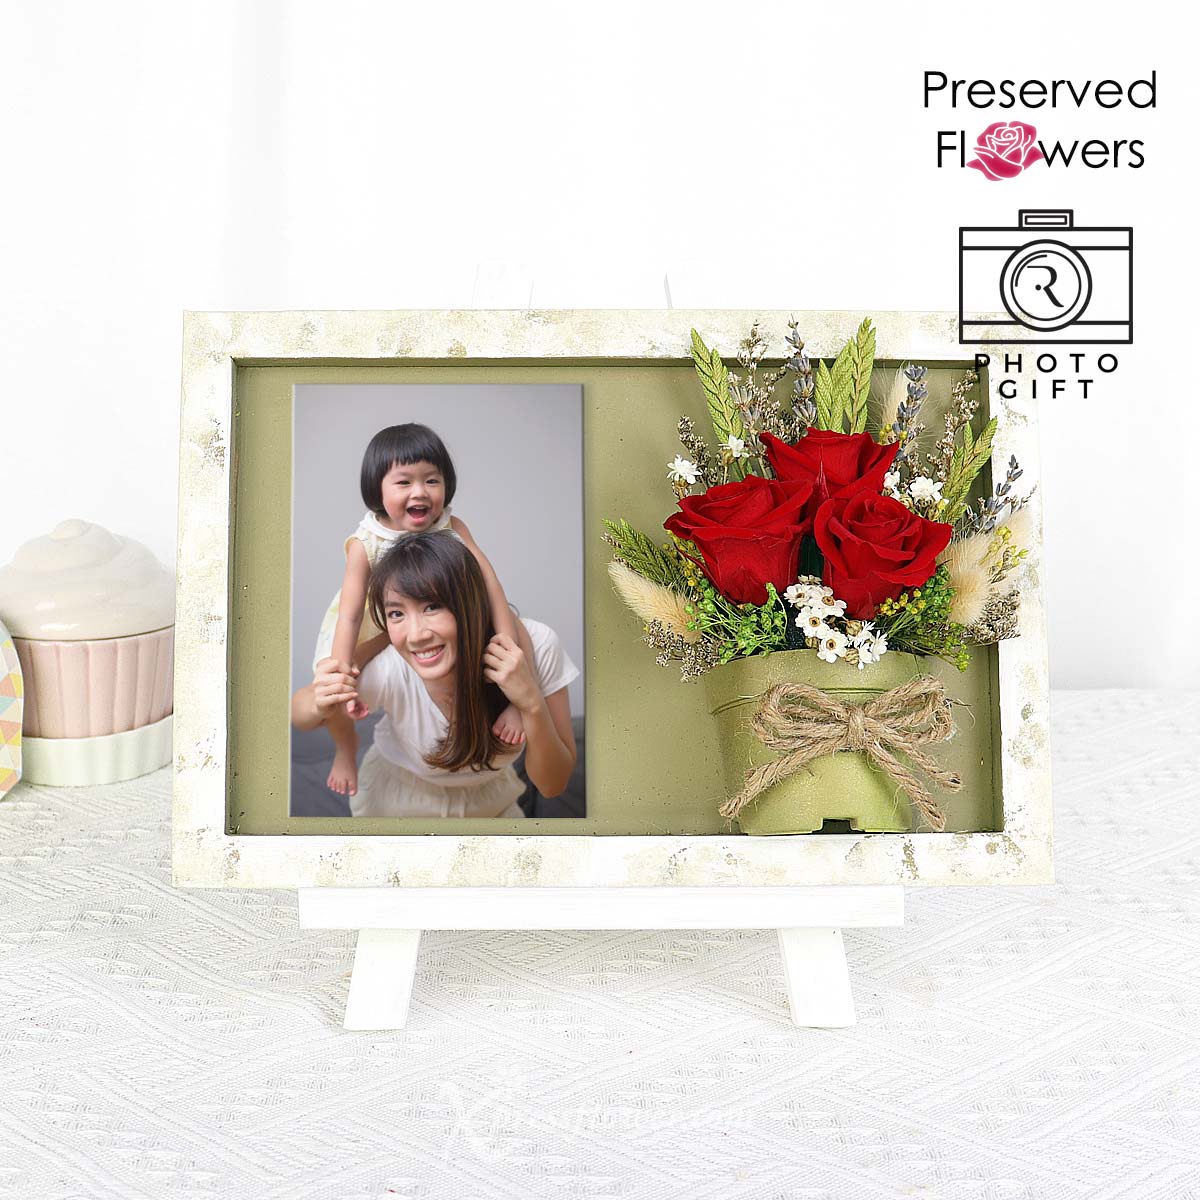 PR2309 Blooms & Snaps (Preserved Flowers Photo Frame with Personalised Photo) 1a